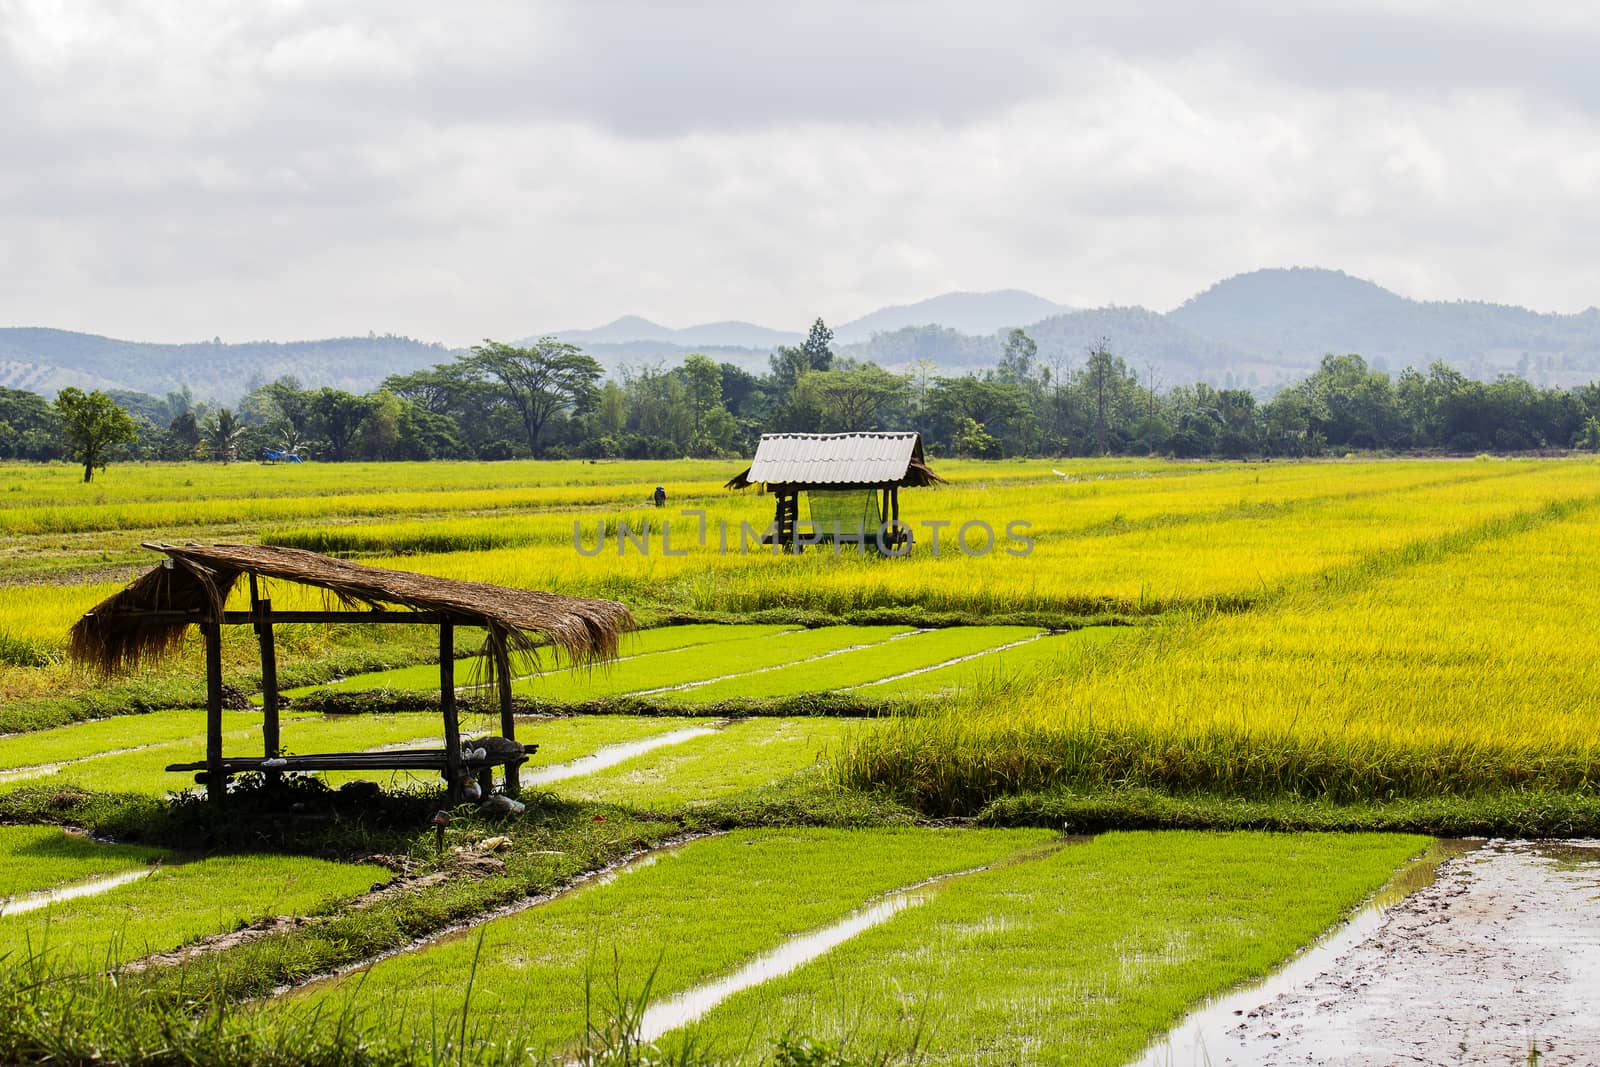 Cottage in rice field thailand by ibahoh